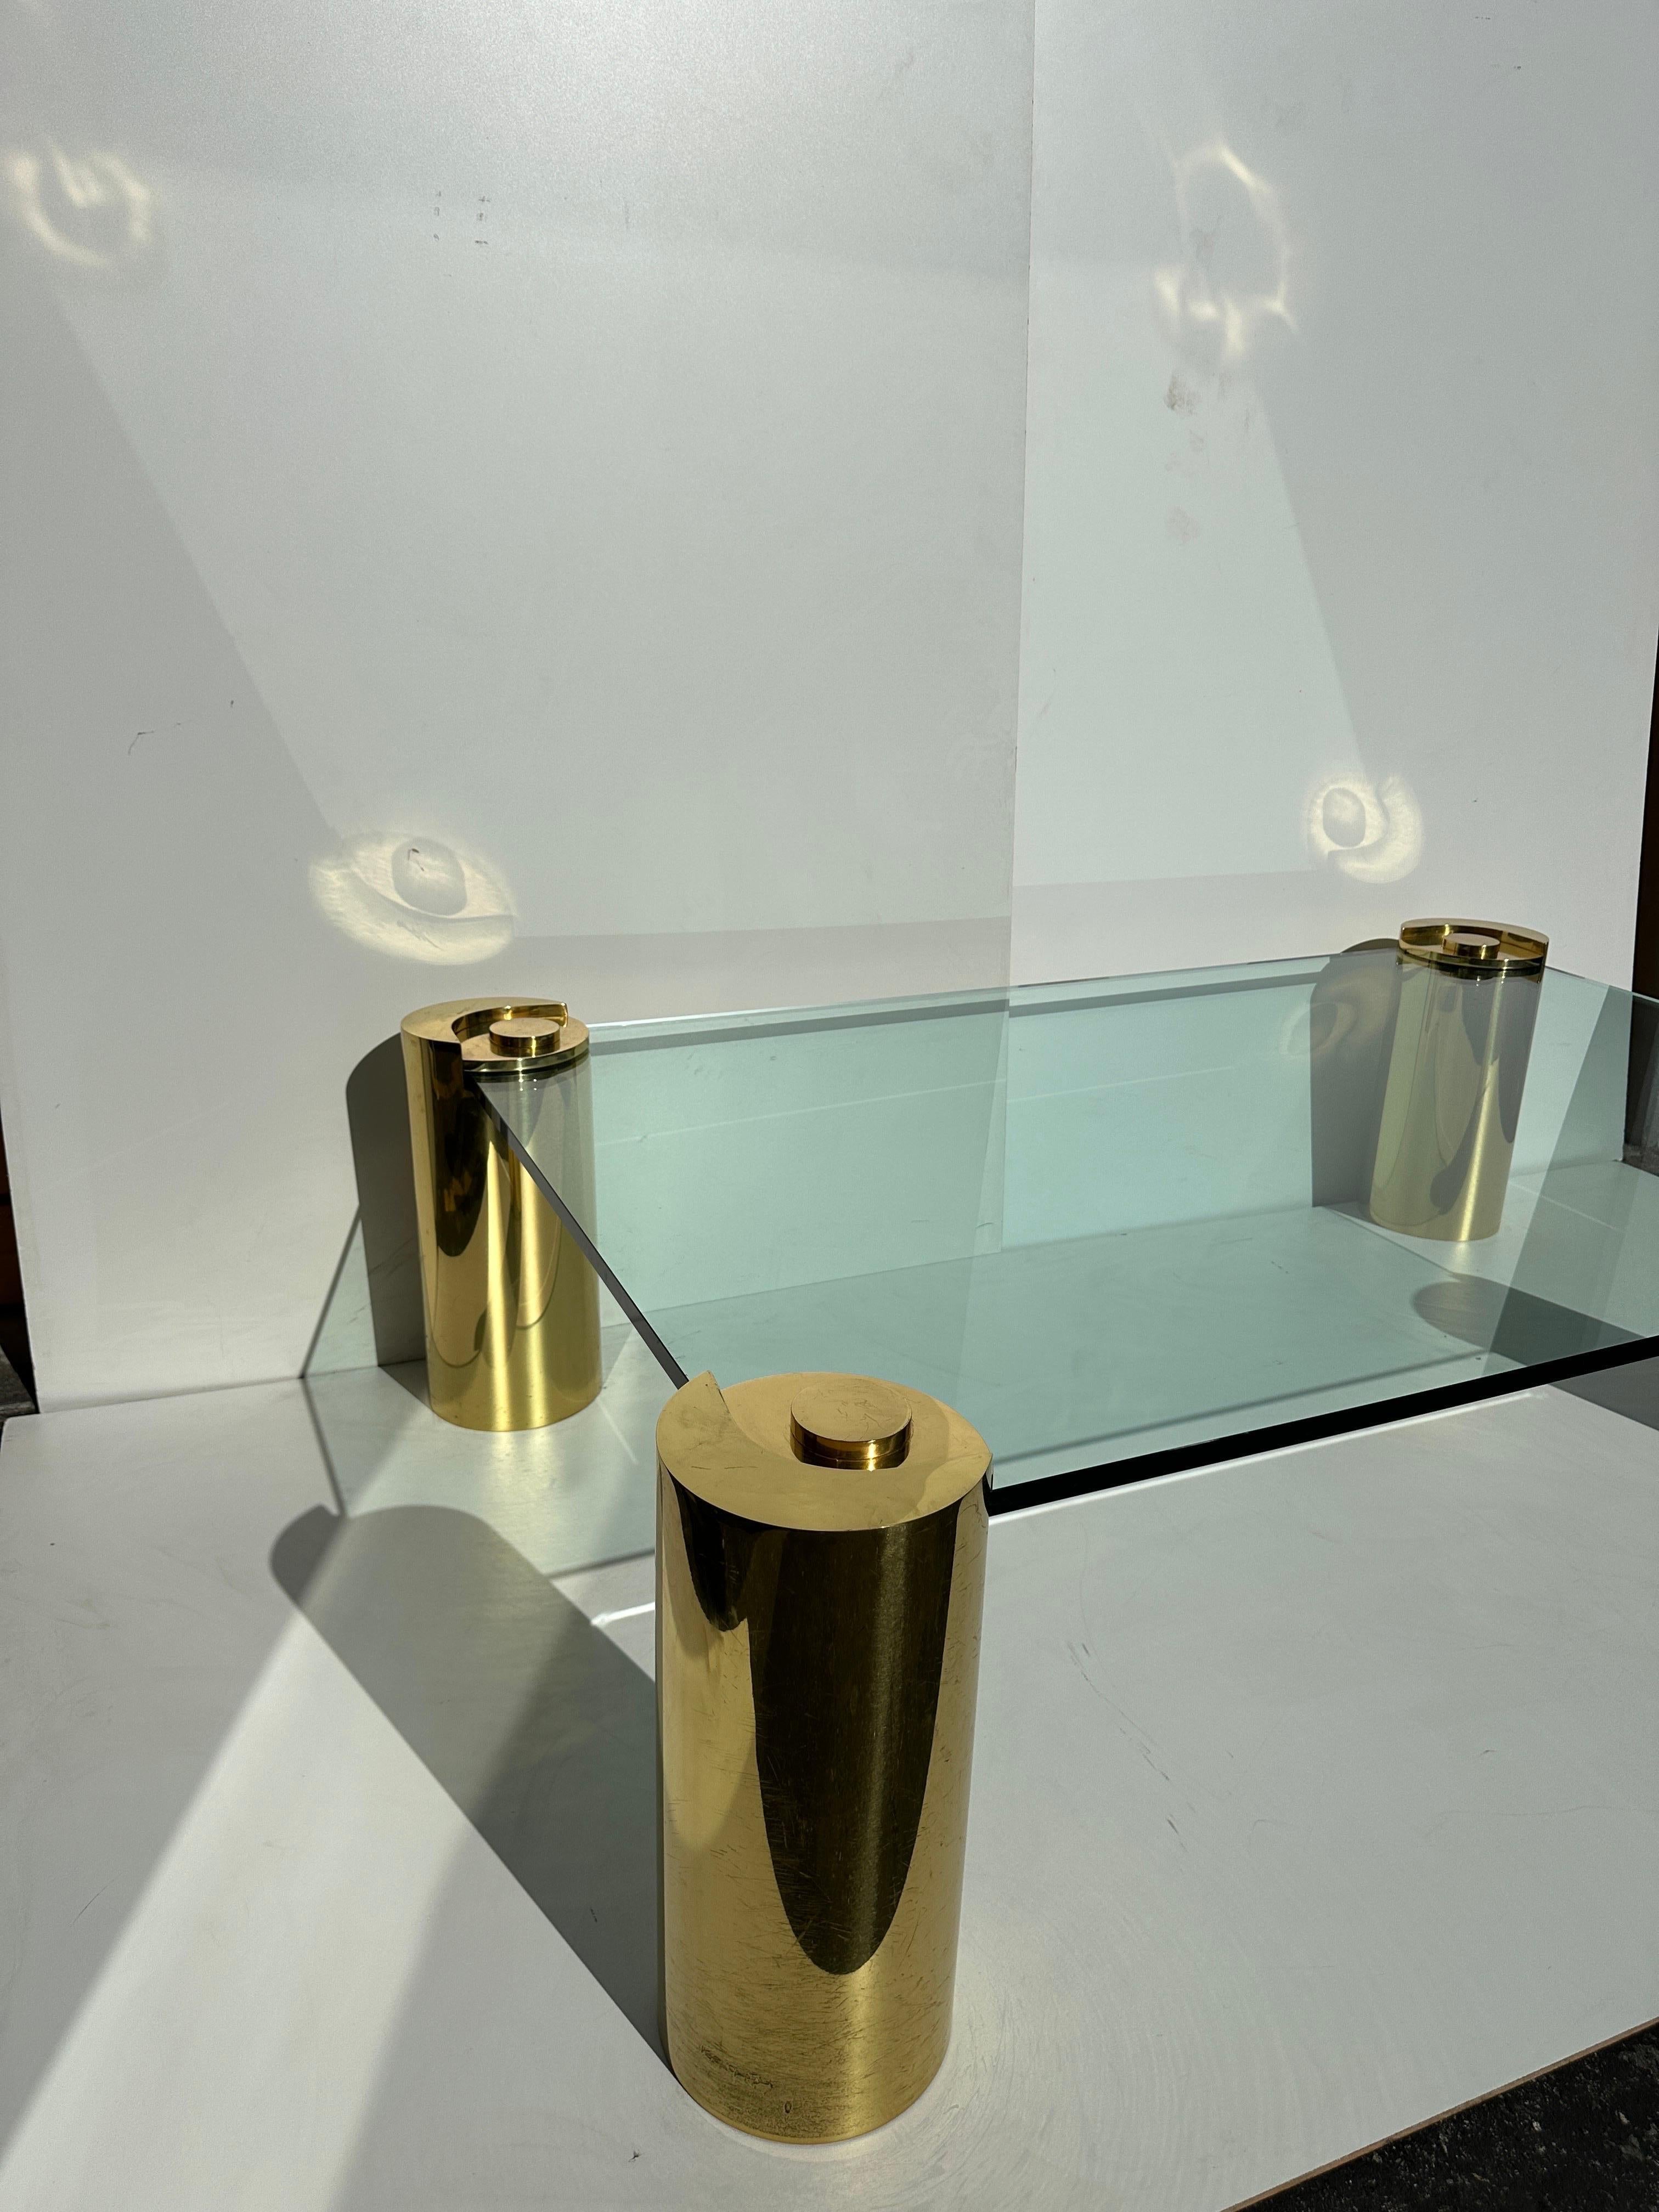 Signed Karl Springer tubular brass coffee table with rectangular 3/4” thick glass.
Each brass cylinder is 8” diameter by 20” high.
Only glass is 40” x 60” x 3/4” thick.
Overall dimensions are 44” x 64” x 20” high.
Glass table top is 17” high.